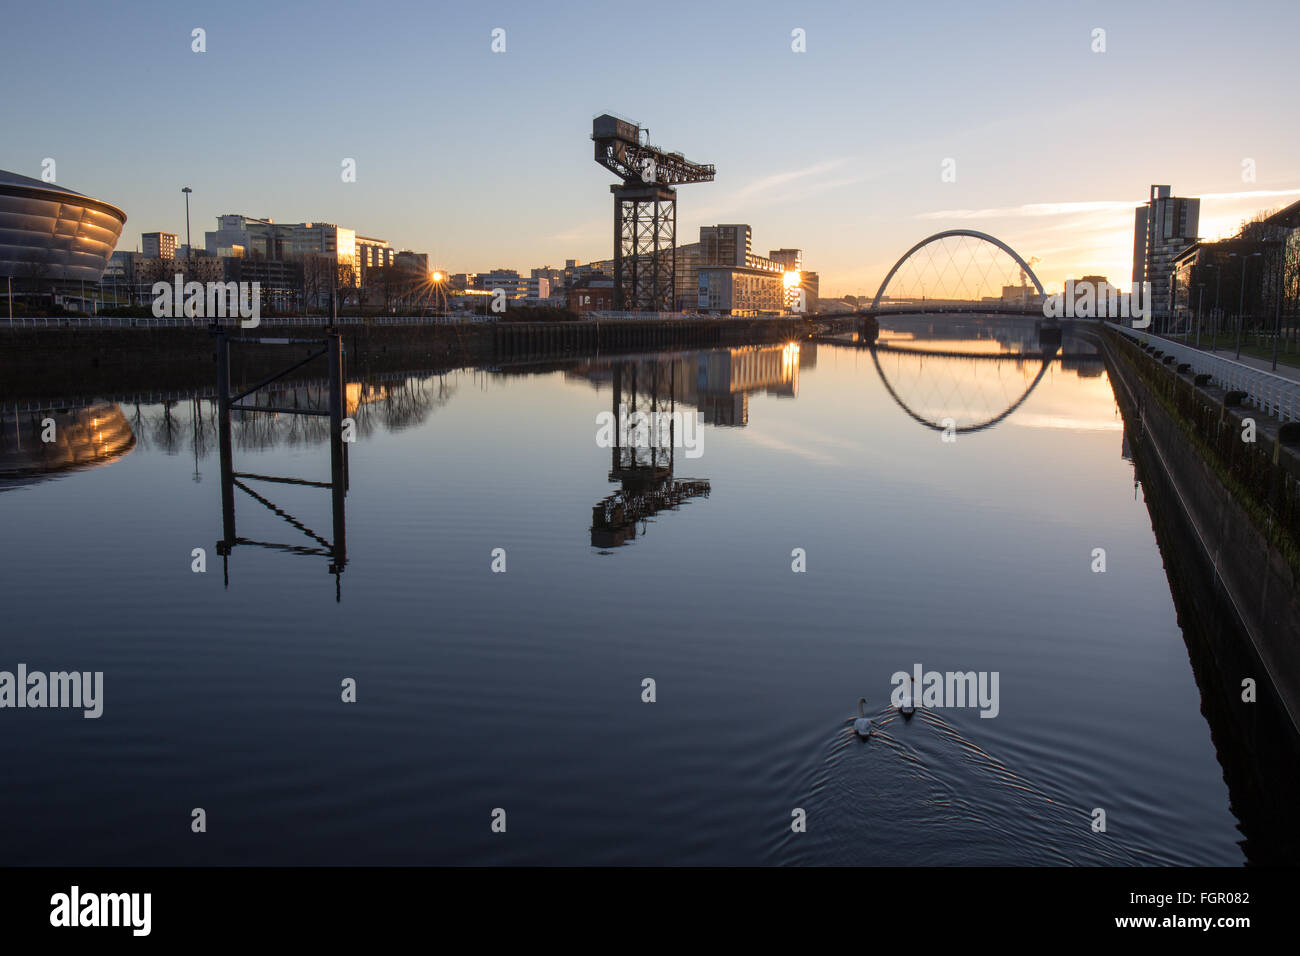 Glasgow River Clyde sunrise with swans Stock Photo